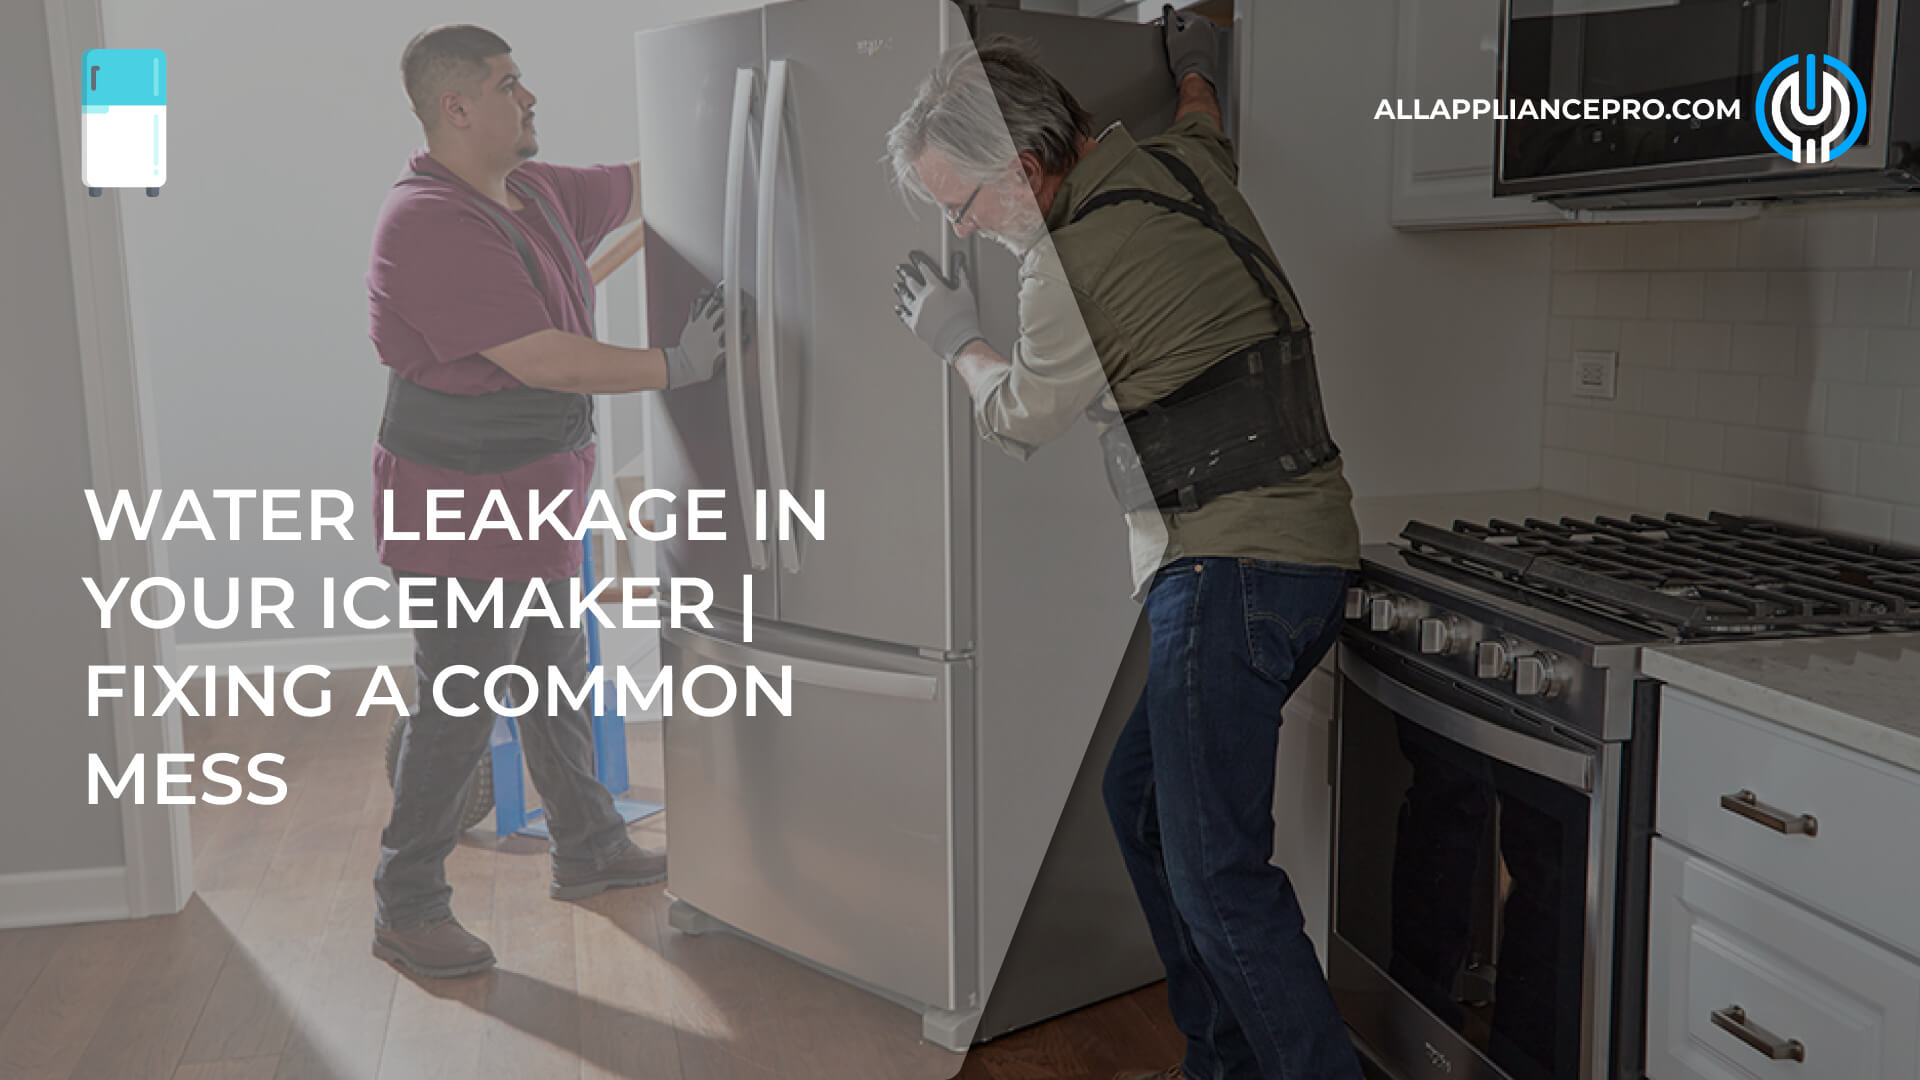 Water Leakage in Your Icemaker | Fixing a Common Mess